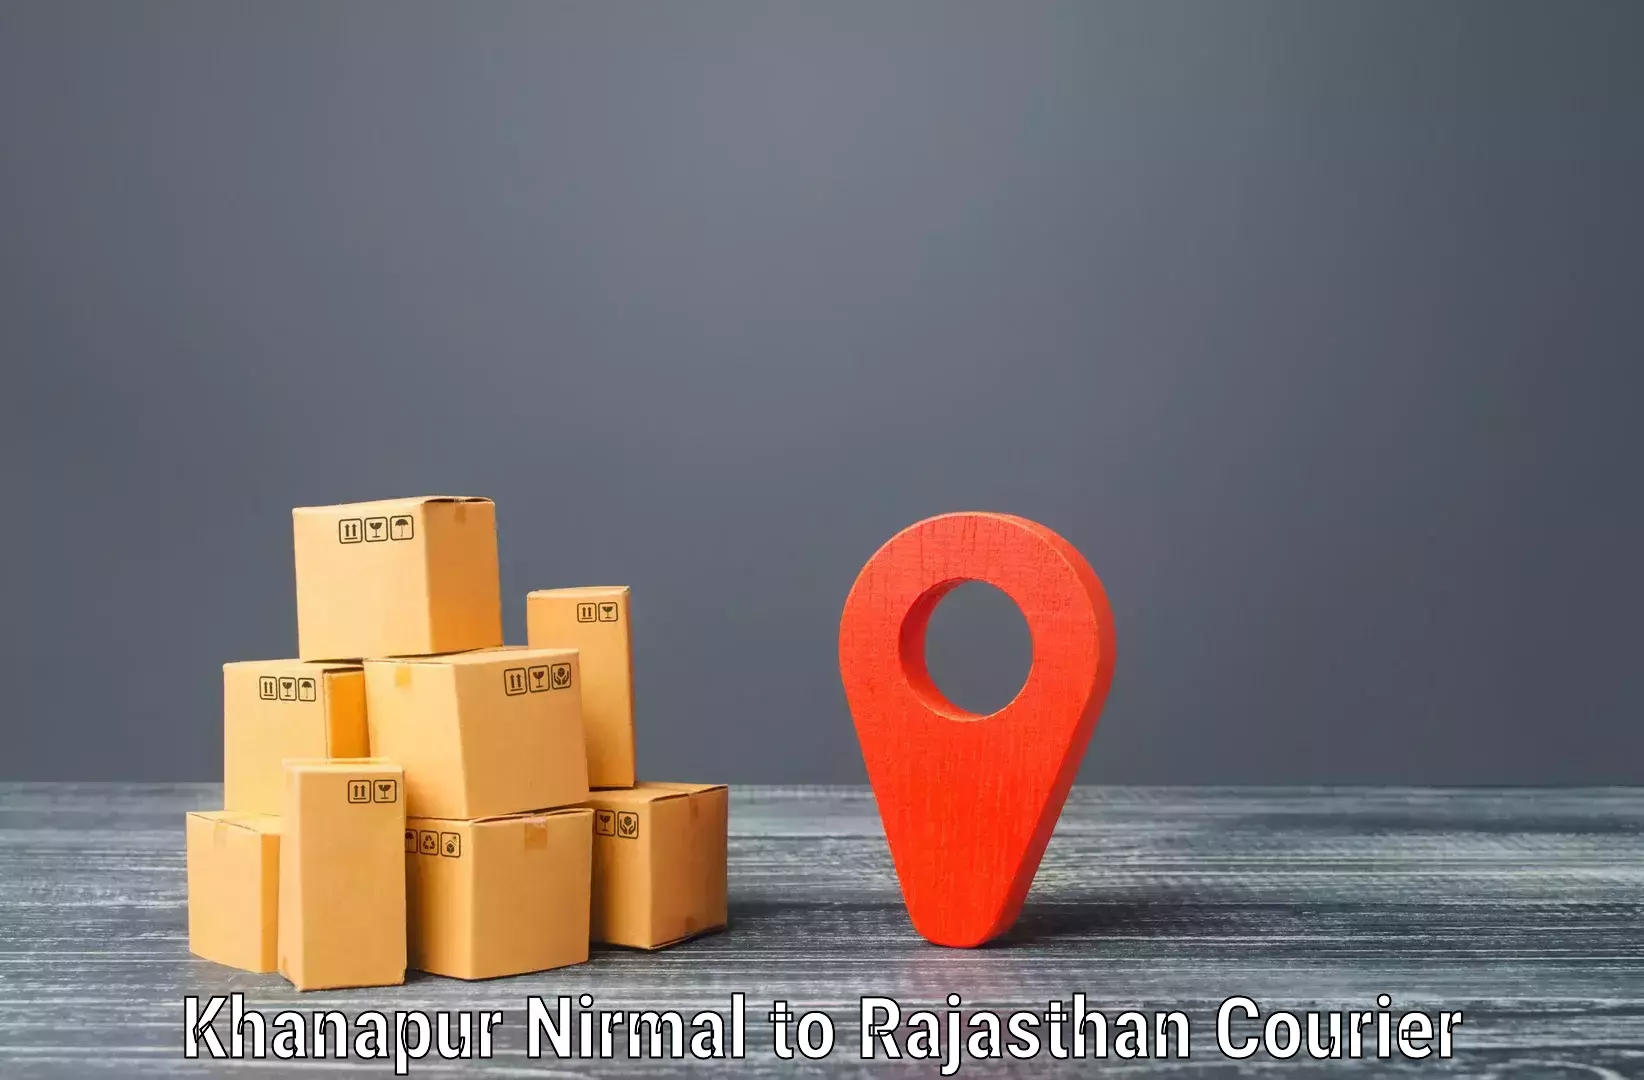 State-of-the-art courier technology Khanapur Nirmal to Ghator